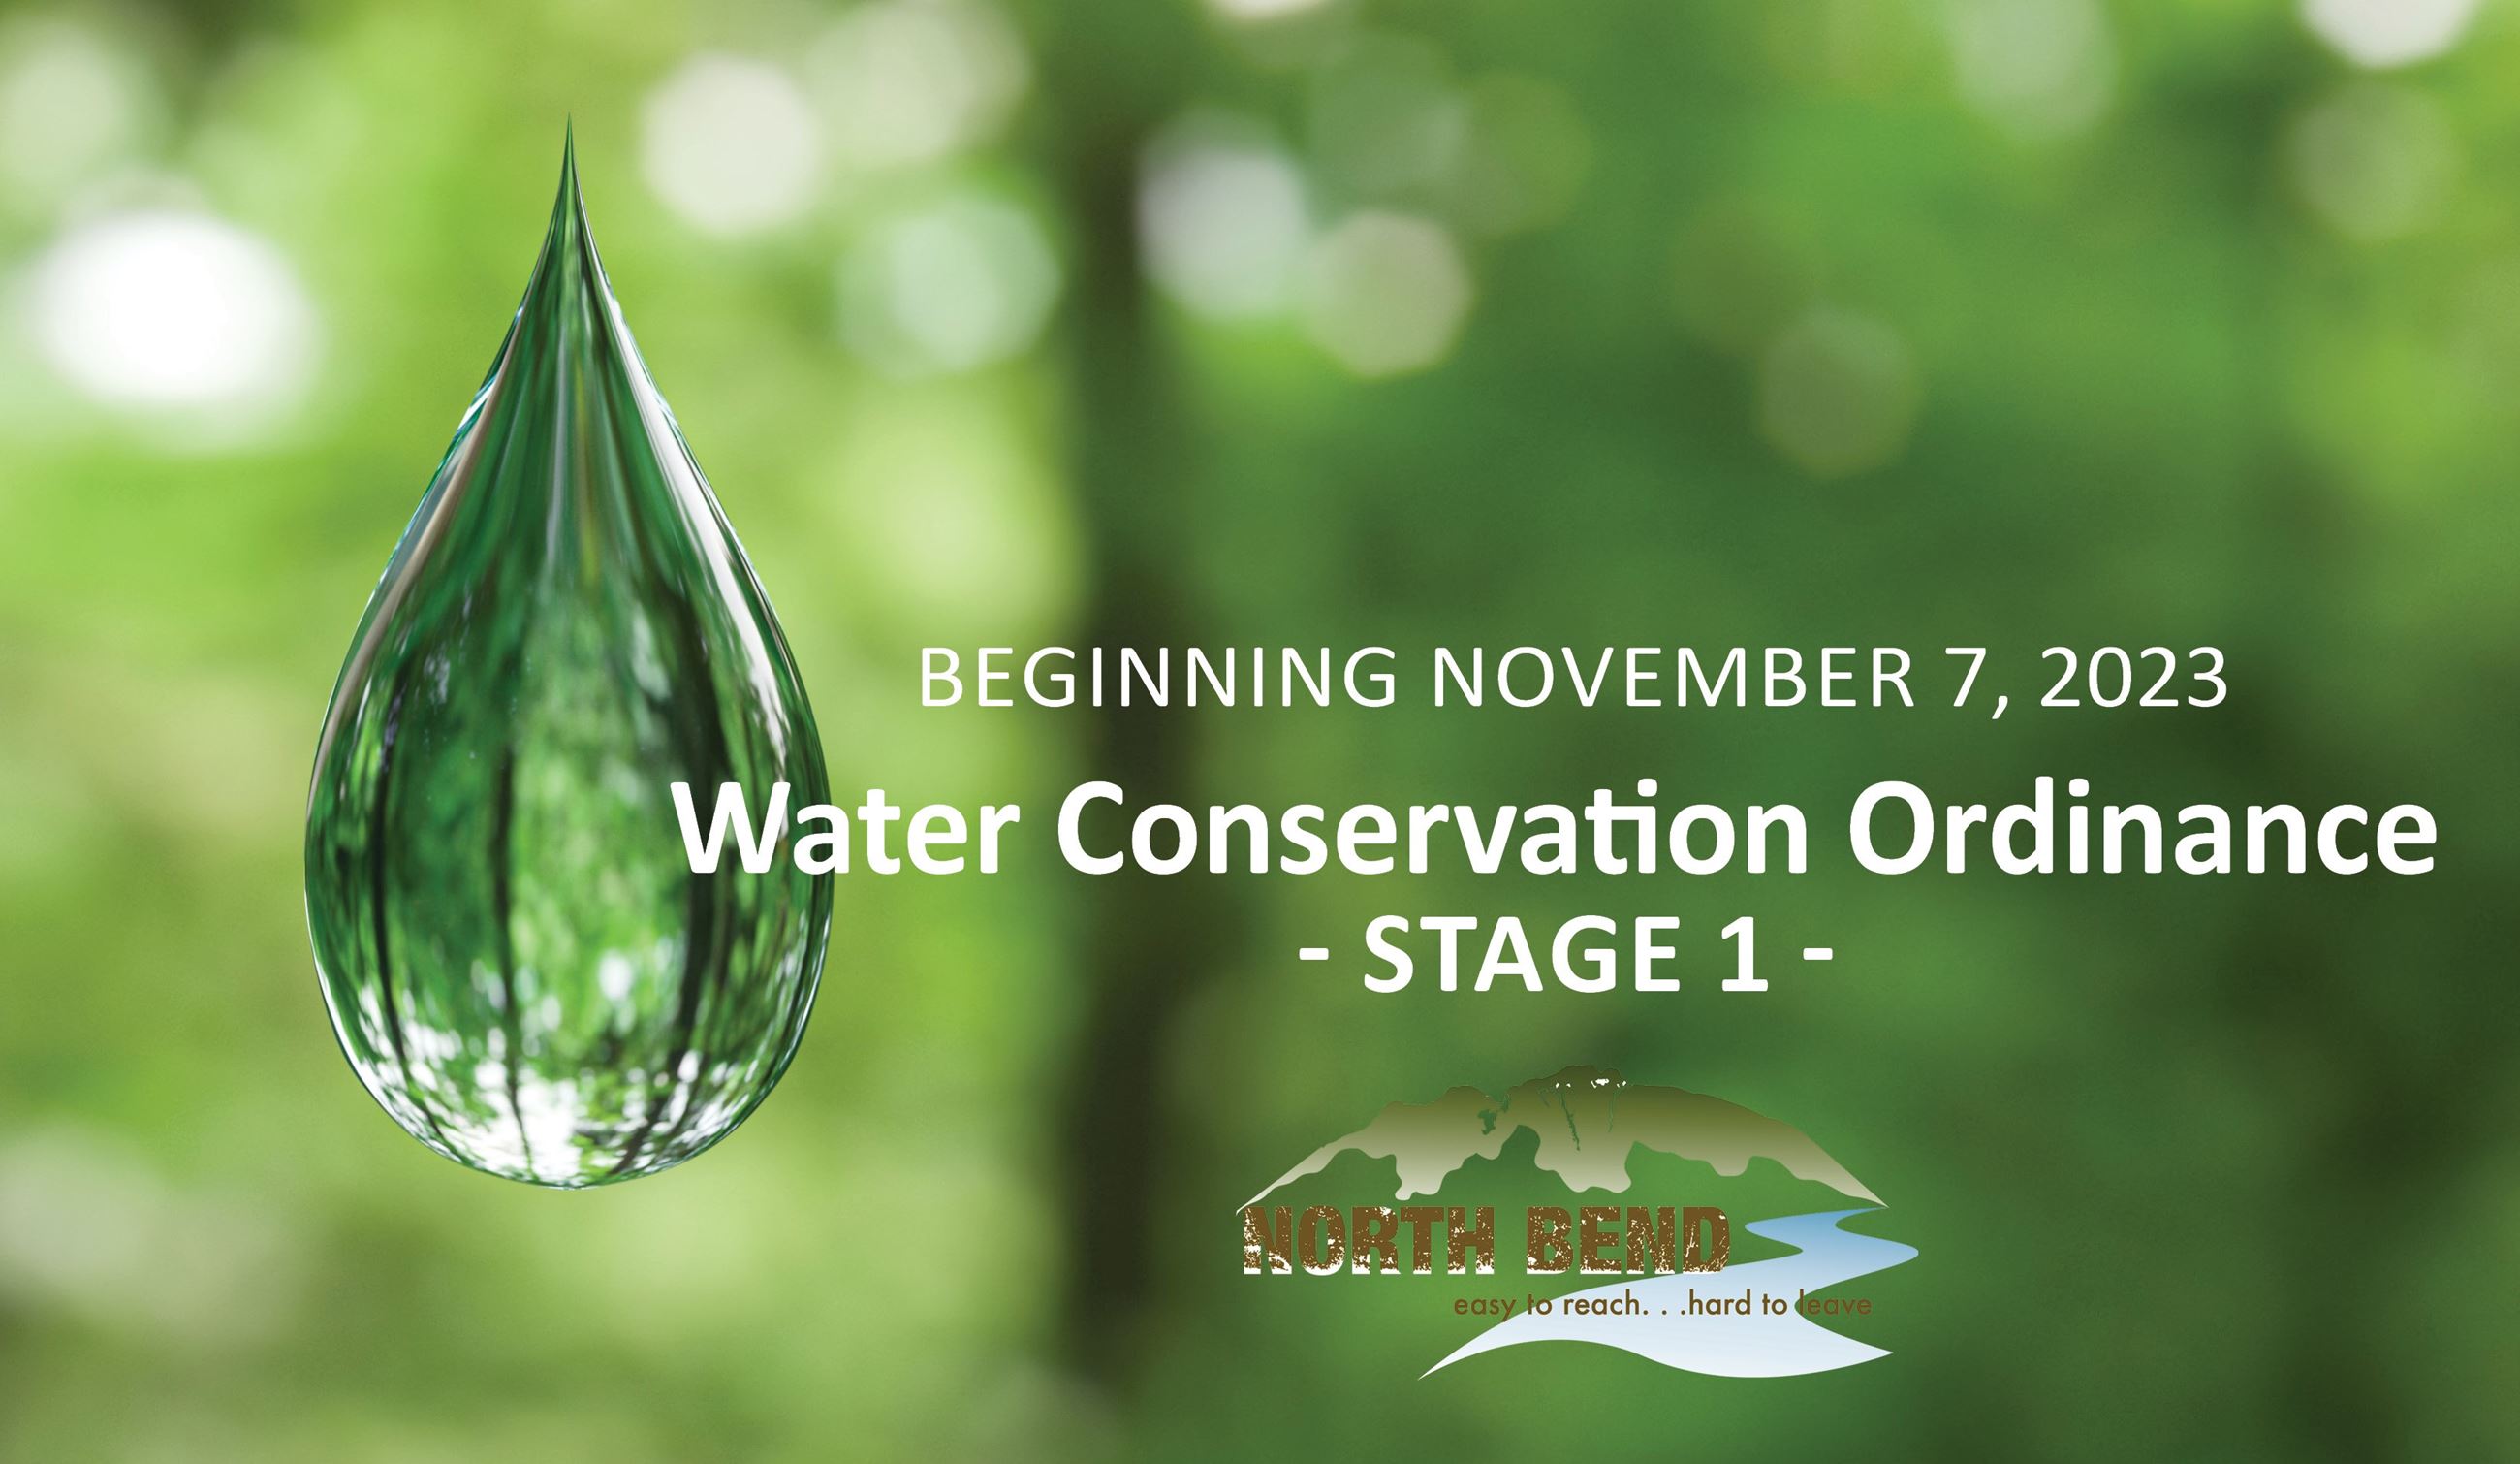  North Bend Water Conservation Ordinance moves down to Stage 1, effective November 7 